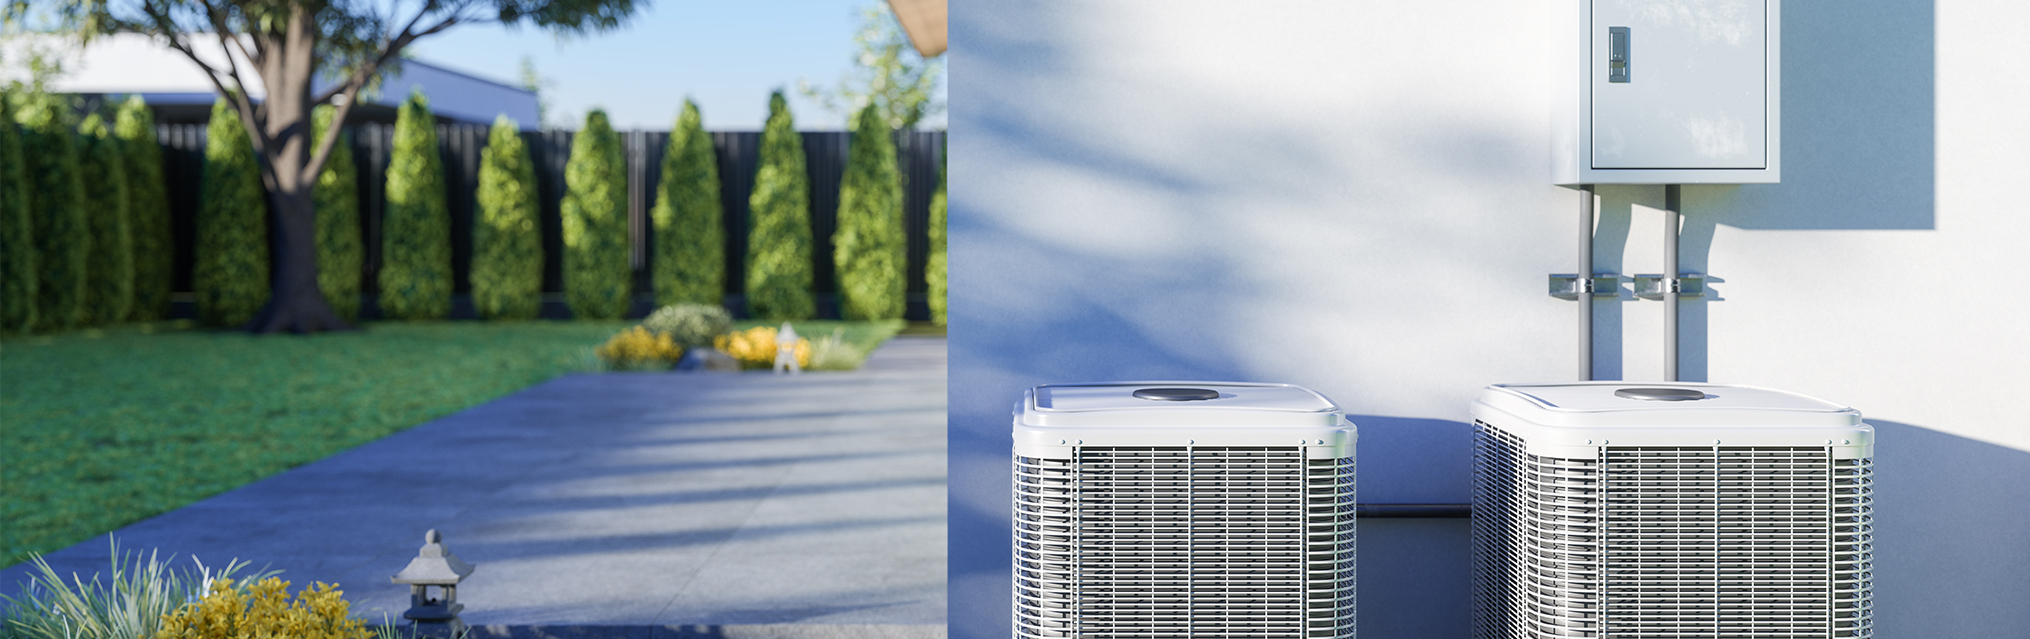 Save 20% on your AC and heating repairs and maintenance with Airtron
